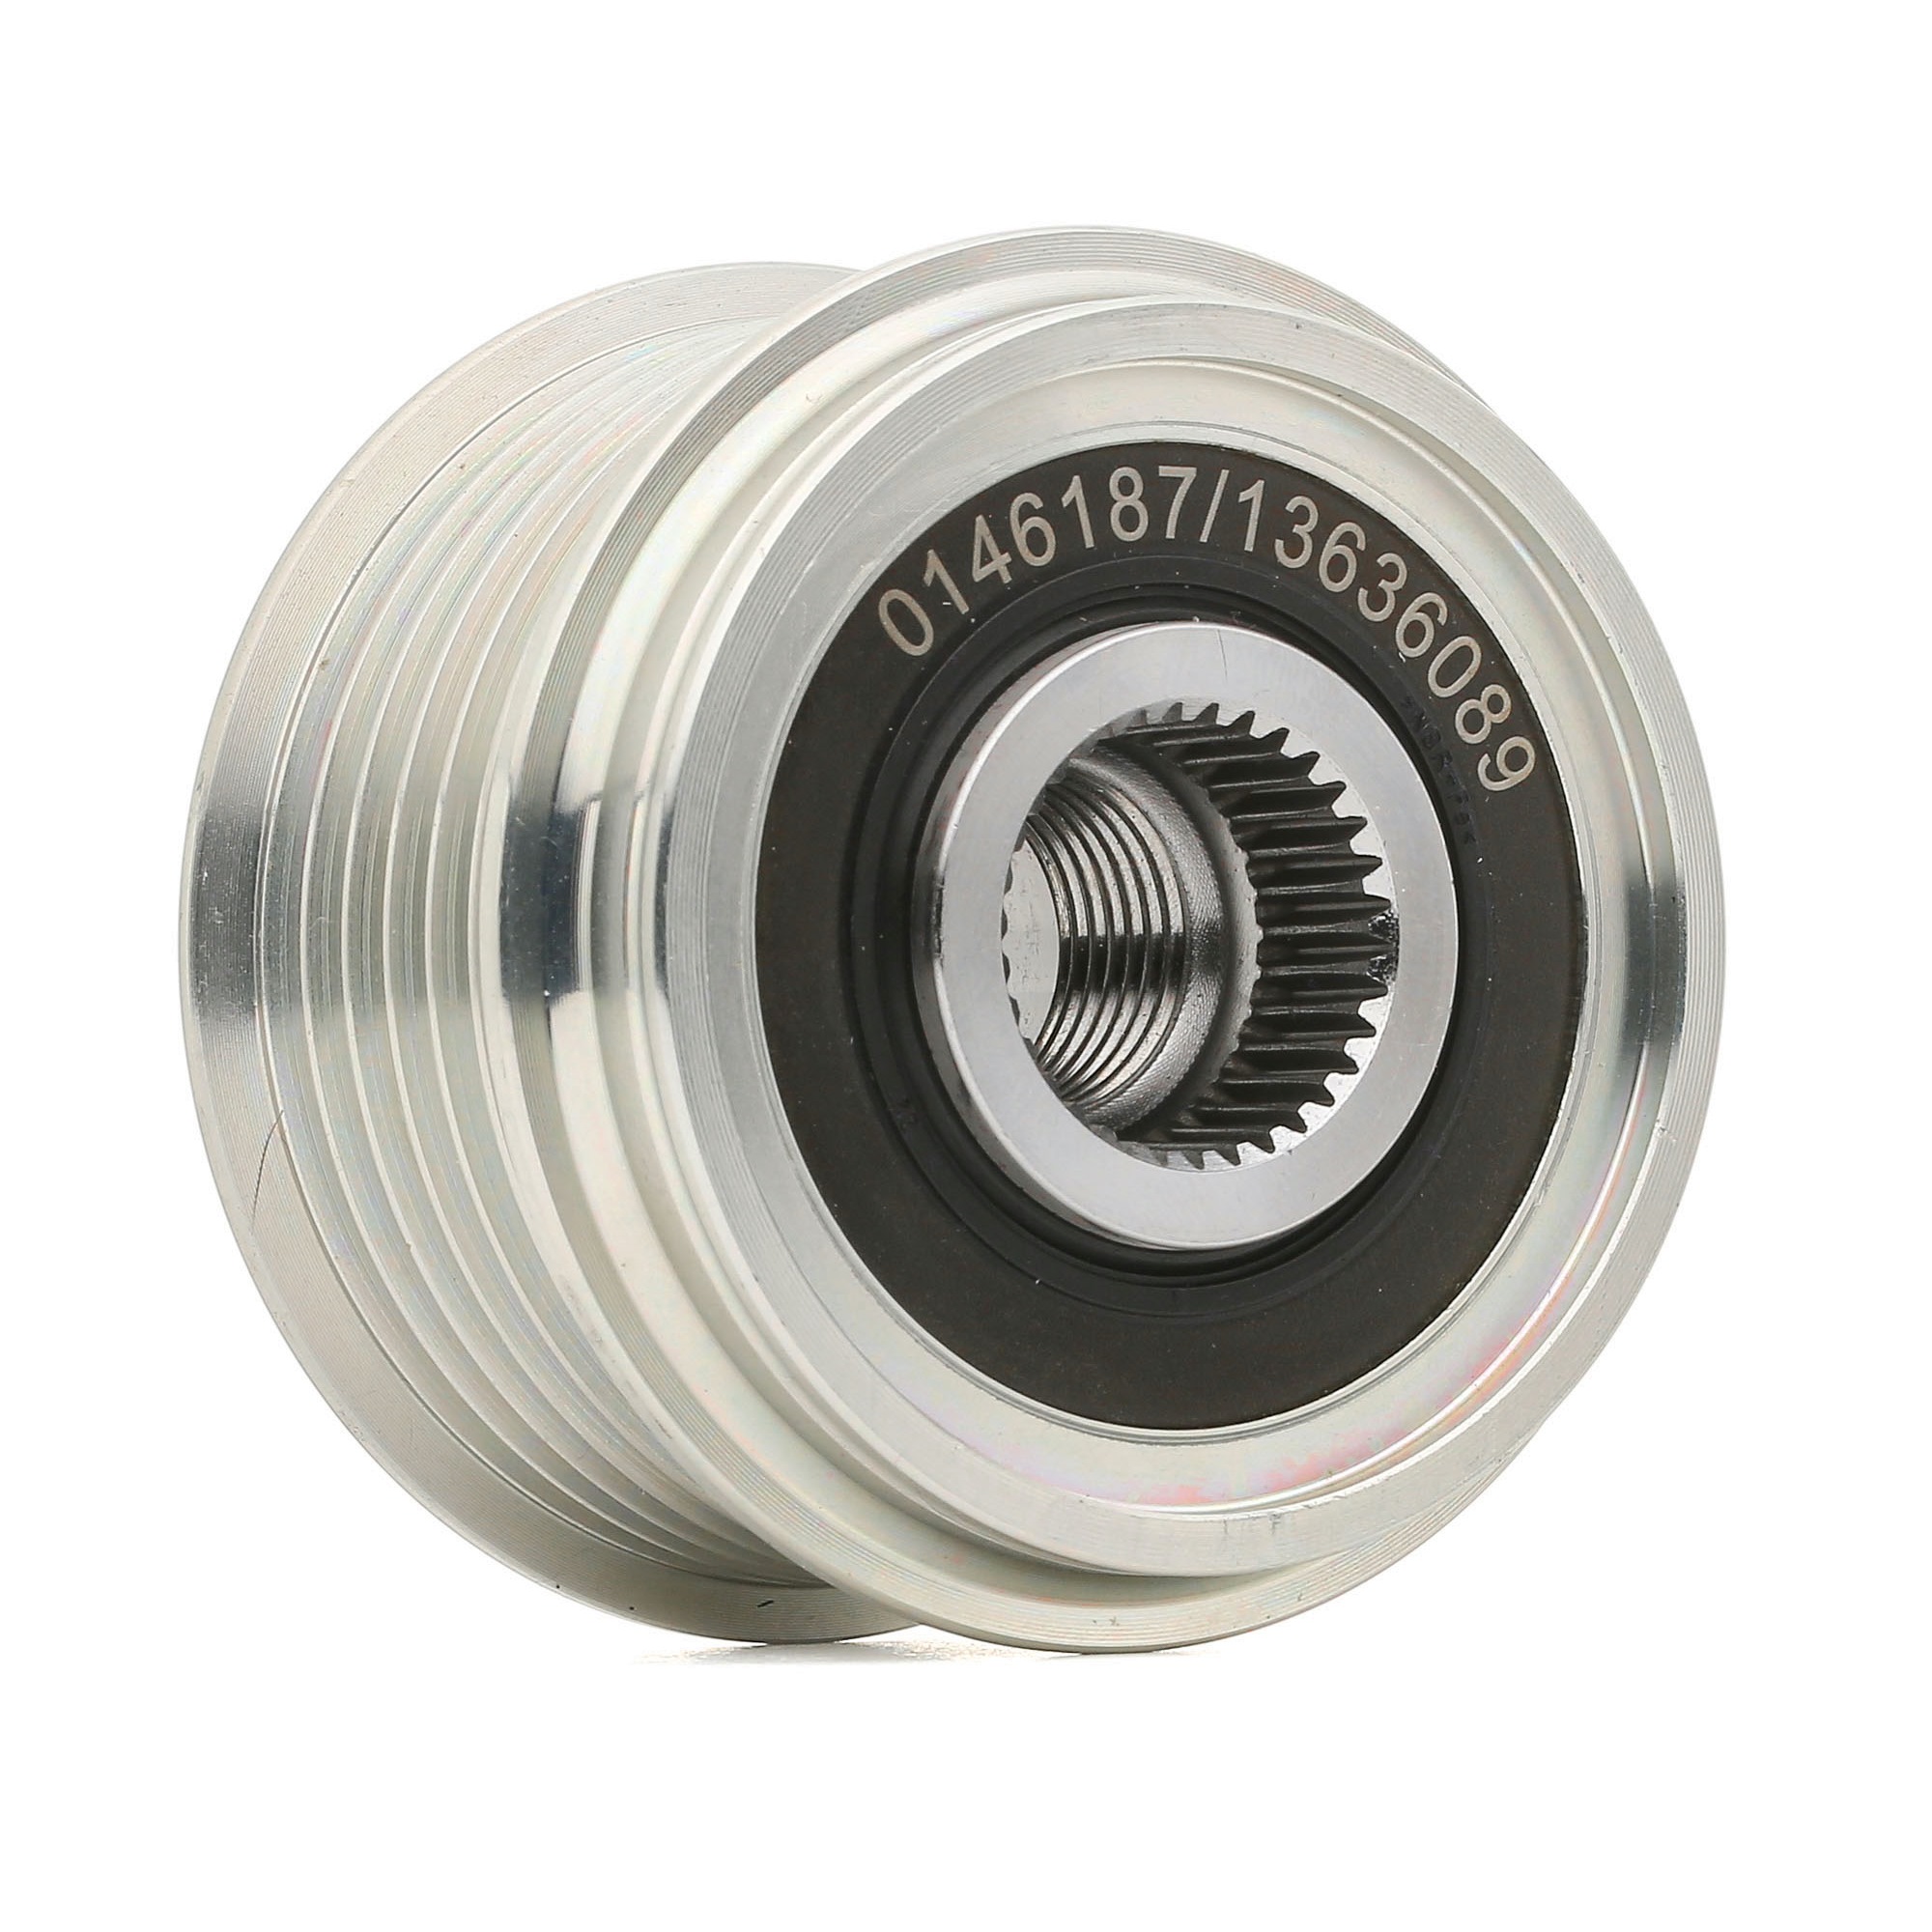 STARK SKFC-1210055 Alternator Freewheel Clutch Width: 35mm, Requires special tools for mounting